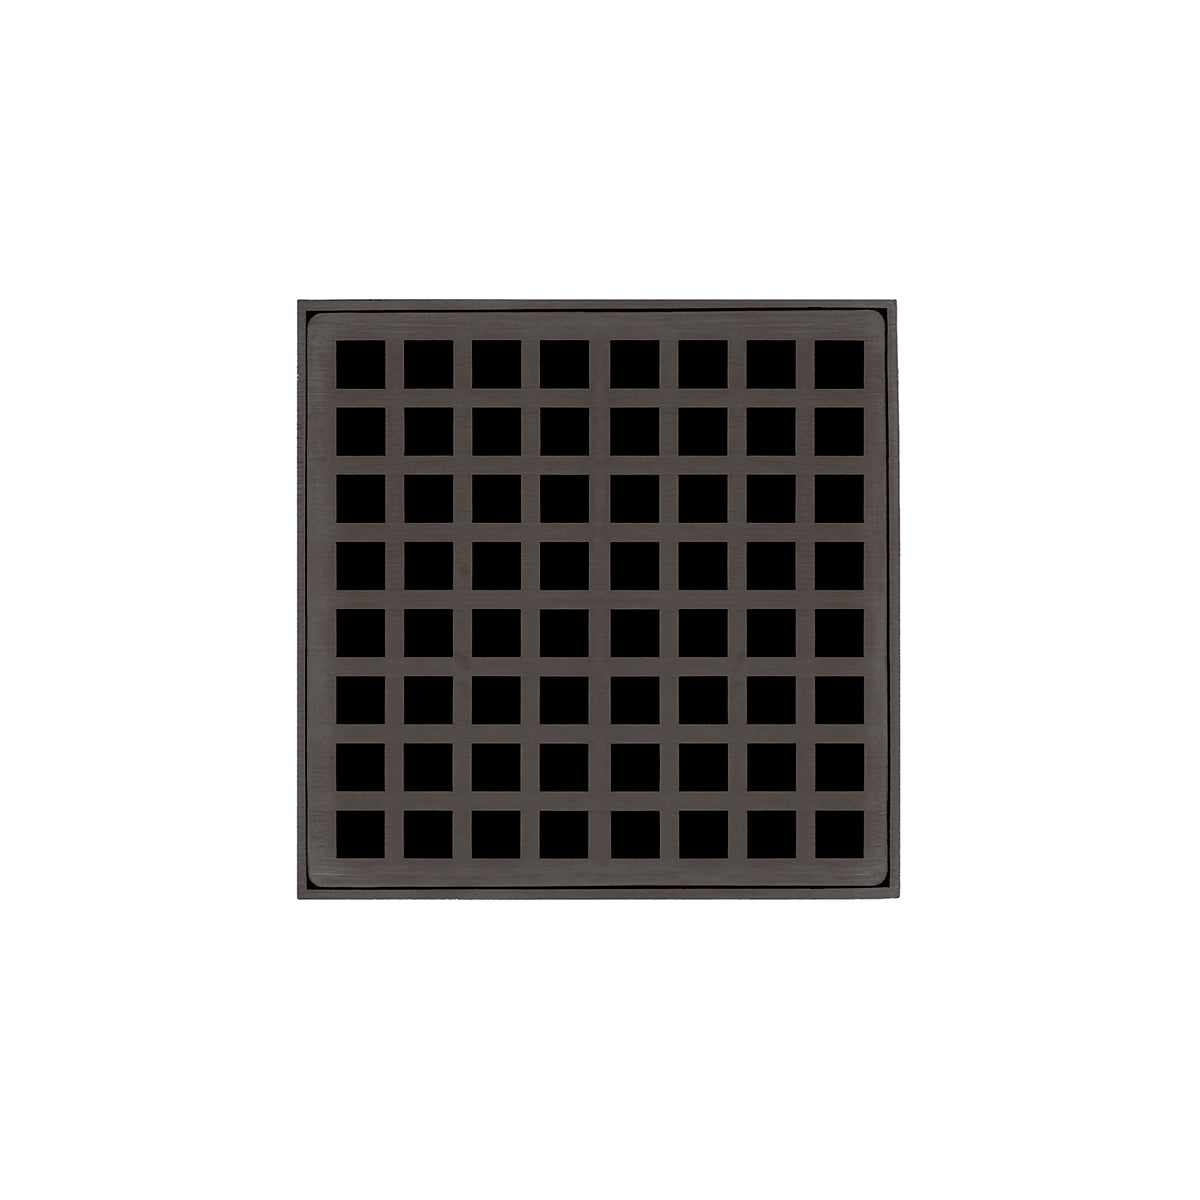 Infinity Drain 5" x 5" QD 5 Premium Center Drain Kit with Squares Pattern Decorative Plate with PVC Drain Body, 2" Outlet